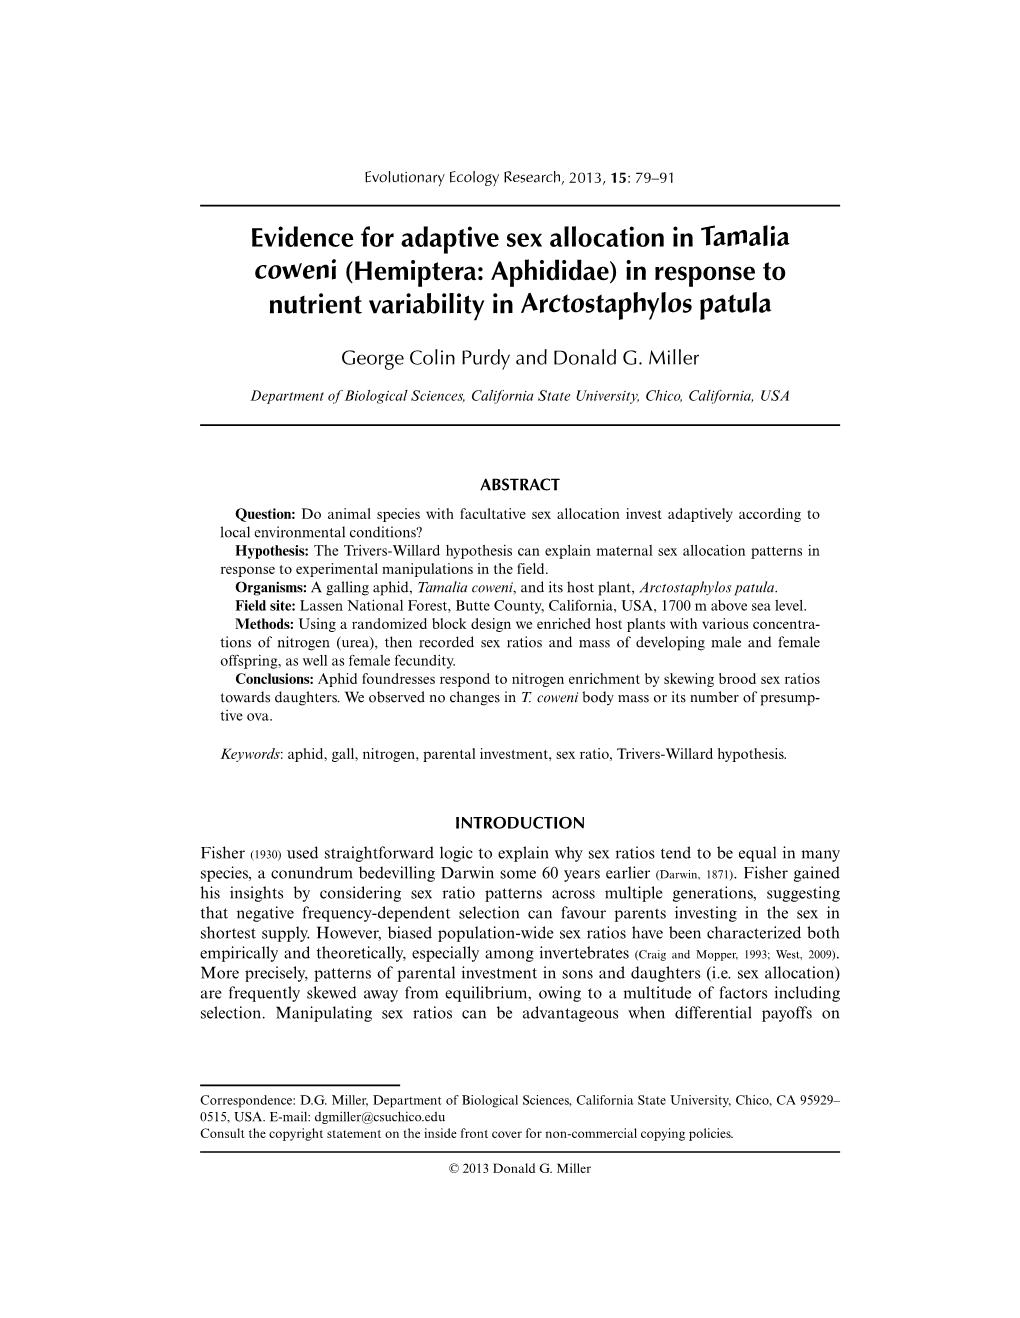 Evidence for Adaptive Sex Allocation in Tamalia Coweni (Hemiptera: Aphididae) in Response to Nutrient Variability in Arctostaphylos Patula